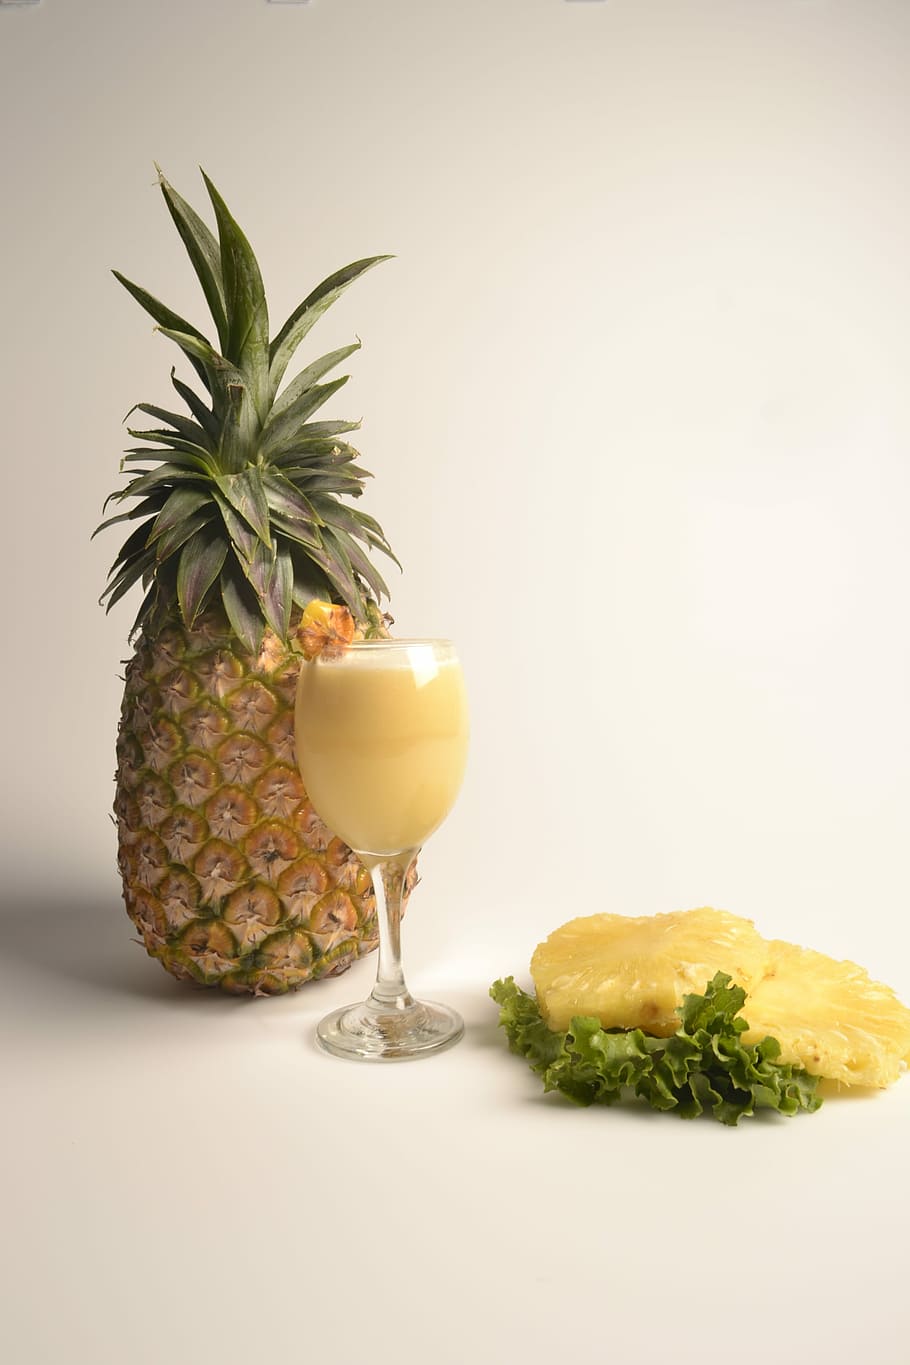 pineapple juice, Pineapple, Pina Colada, Fruit, Cocktail, fruit, cocktail, dessert, food and drink, drink, alcohol